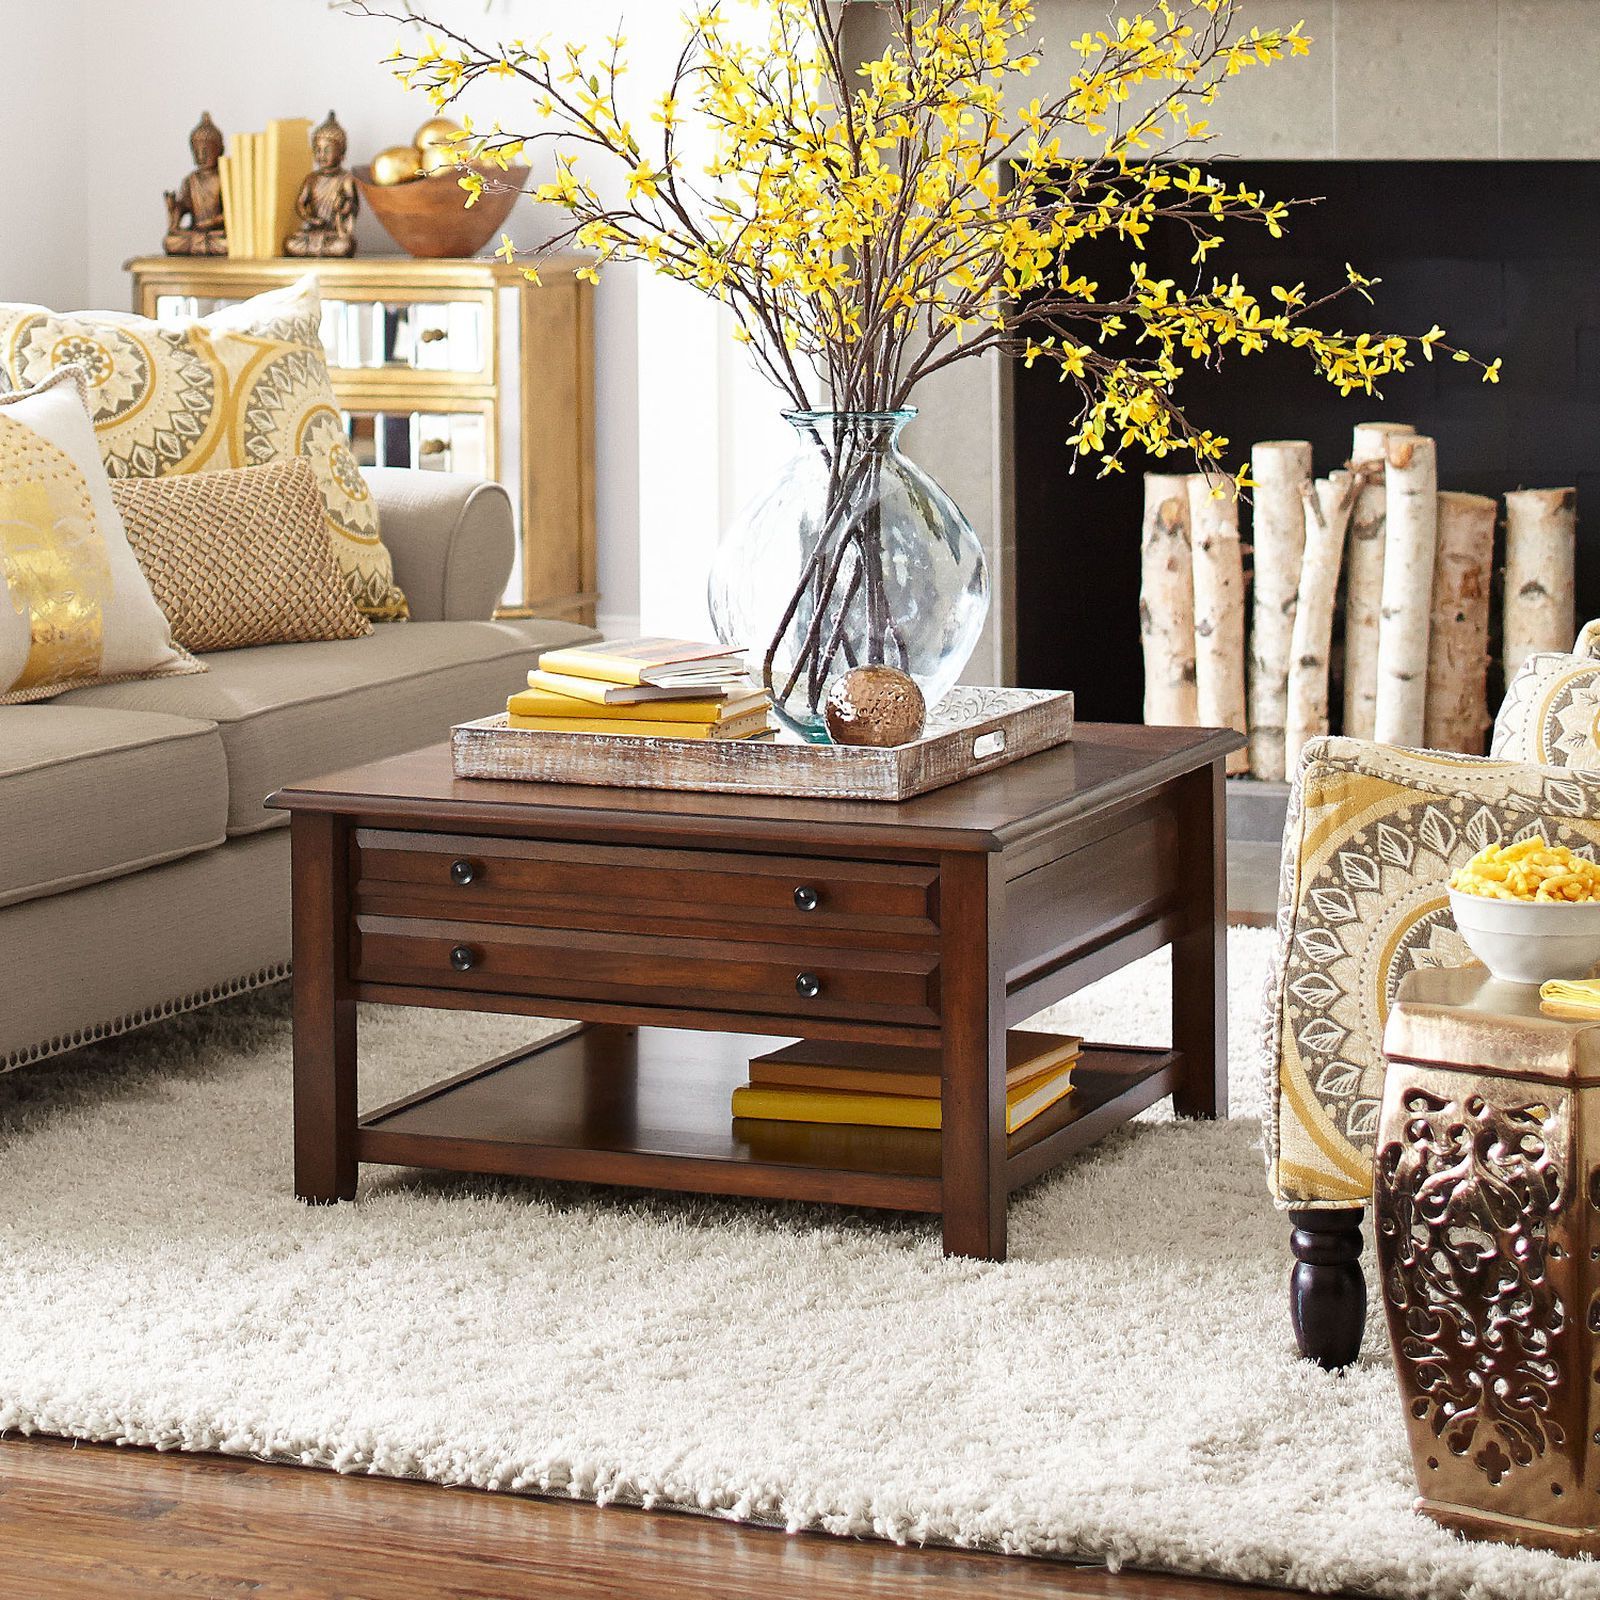 How To Decorate Your Square Coffee Table With Style – Coffee Table Decor Pertaining To Transitional Square Coffee Tables (Gallery 9 of 20)